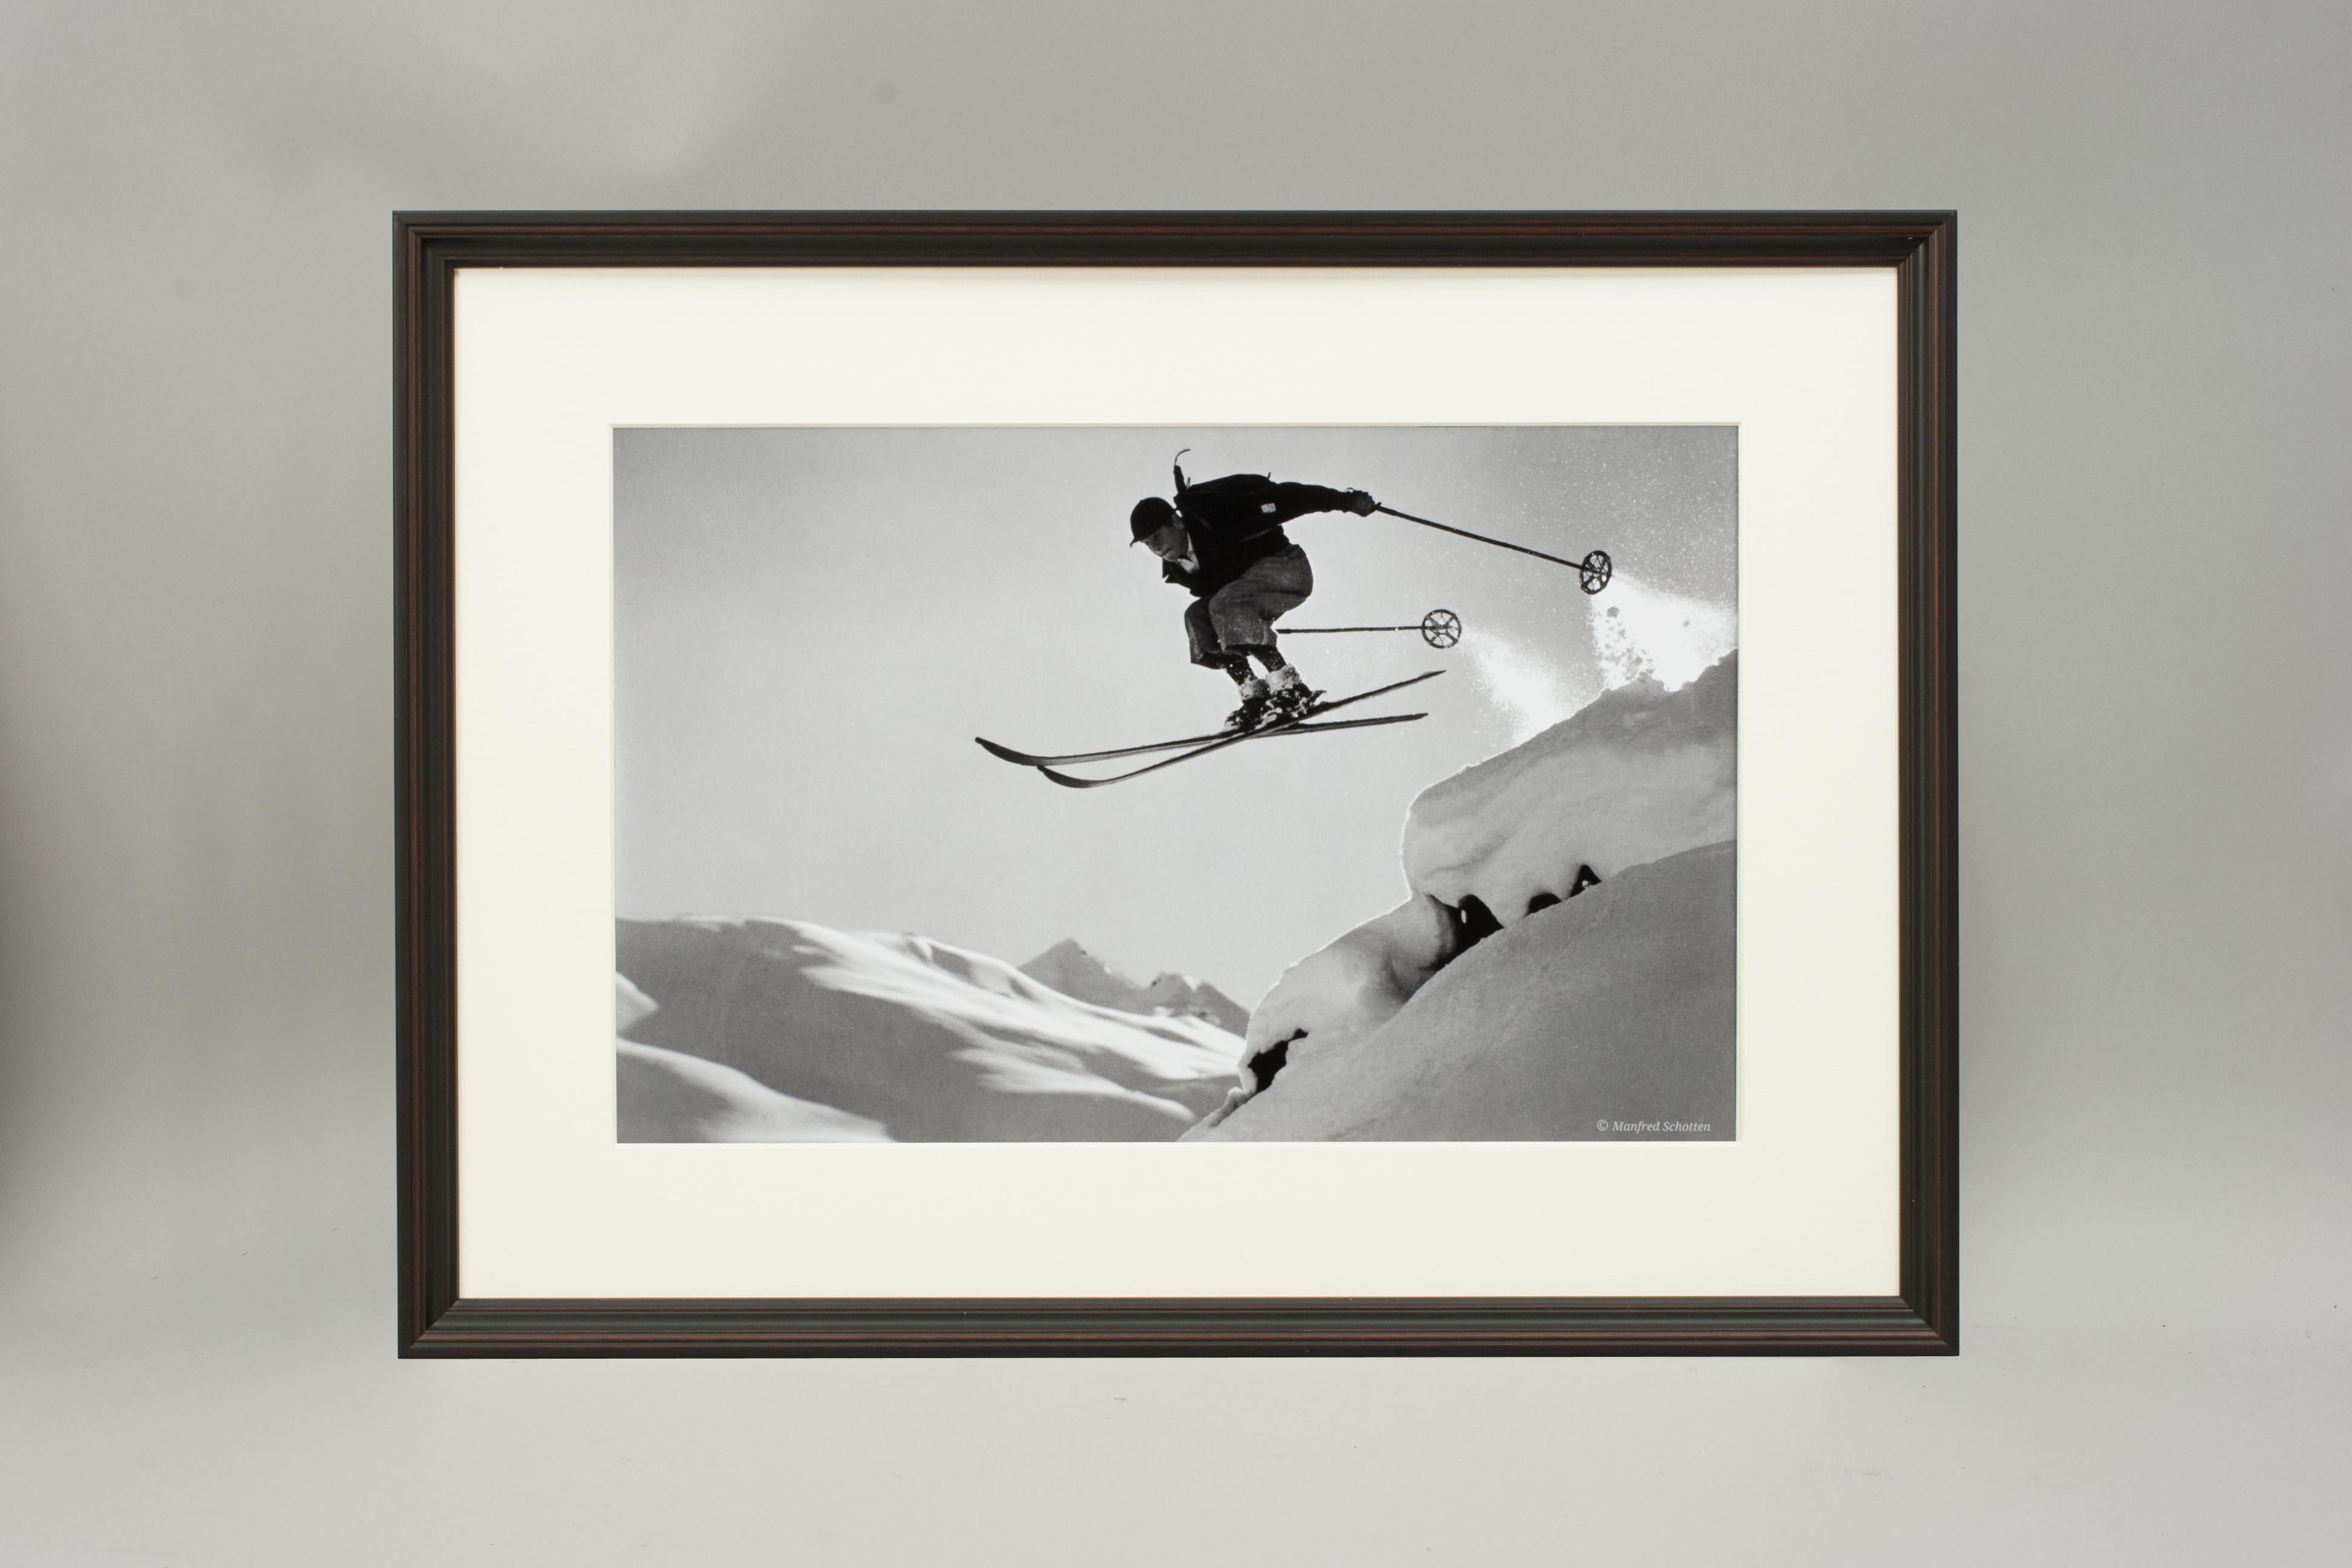 'A COURAGEOUS JUMP', a modern framed and mounted black and white photograph after an original 1930's skiing photograph. The frame is black with a burgundy undercoat, the glazing is clarity+ premium synthetic glass. Black & white alpine photos are